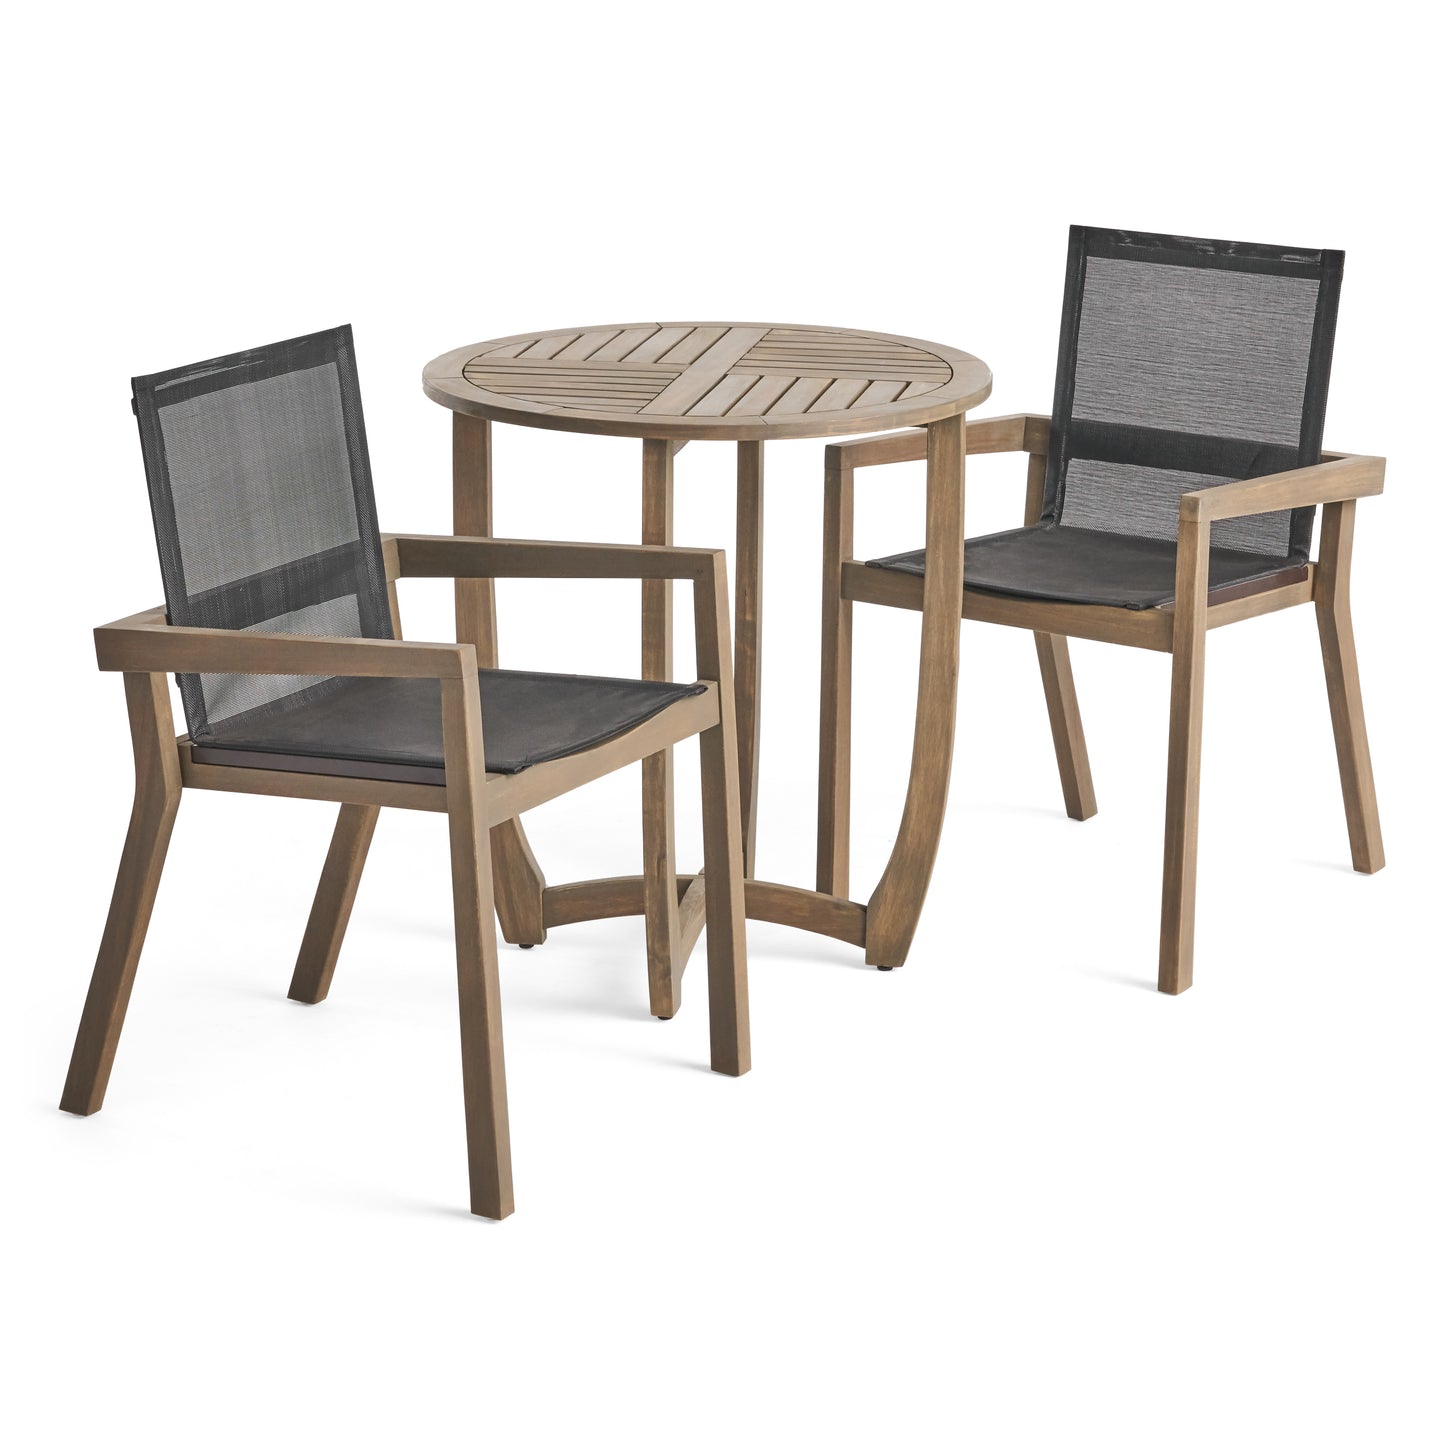 Marcell Outdoor Acacia Wood 3 Piece Dining Set with Mesh Seats